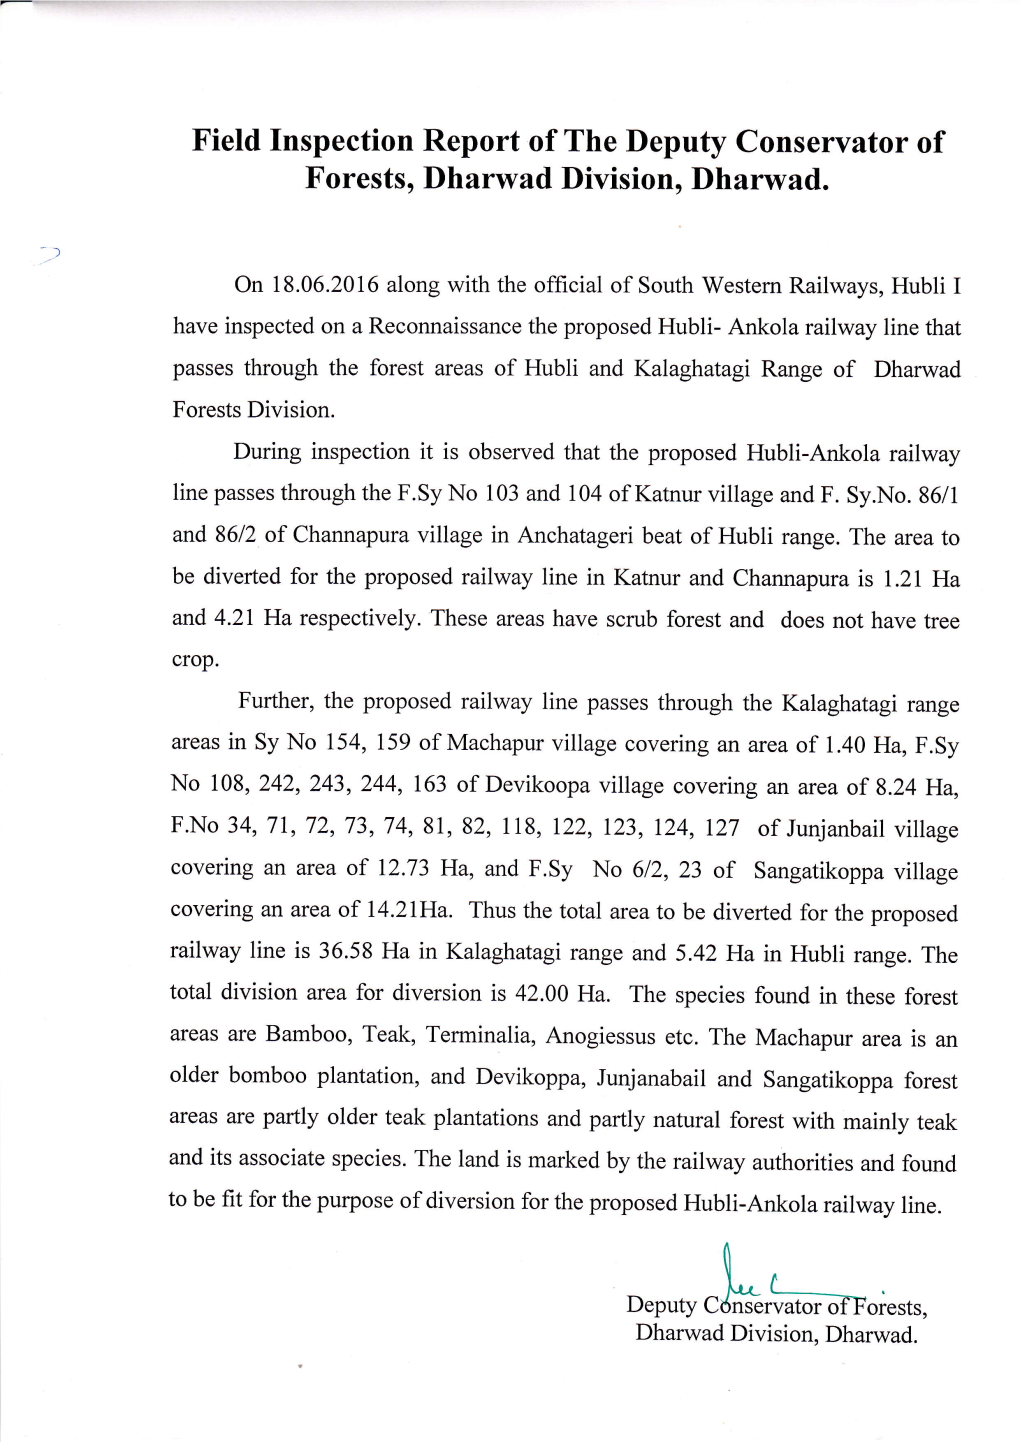 Field Inspection Report of the Deputy Conservator of Forests, Dharwad Division, Dharwad